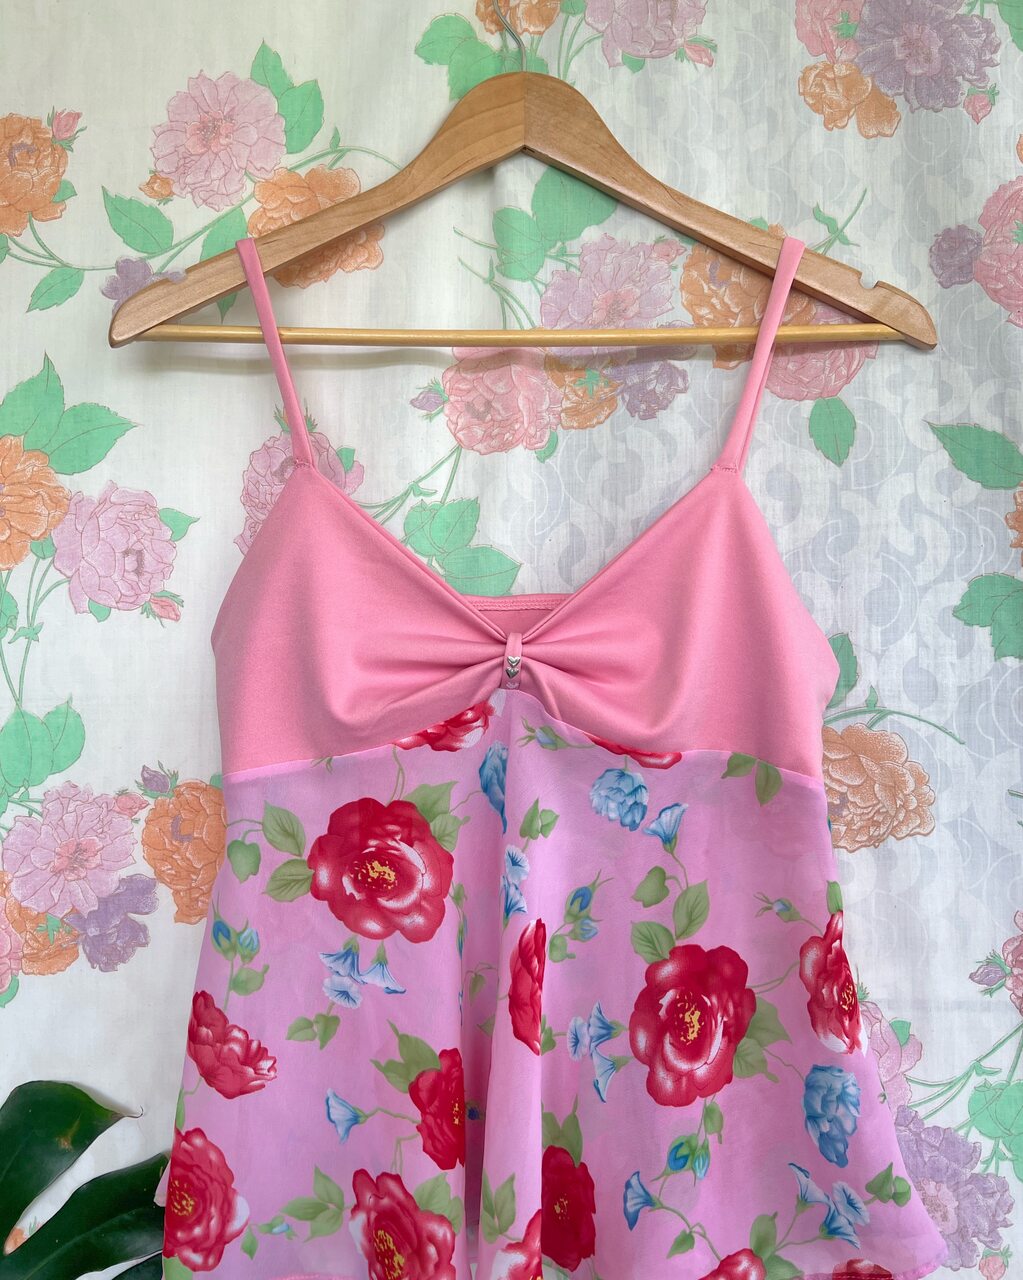 00's Pink Dreamy Top